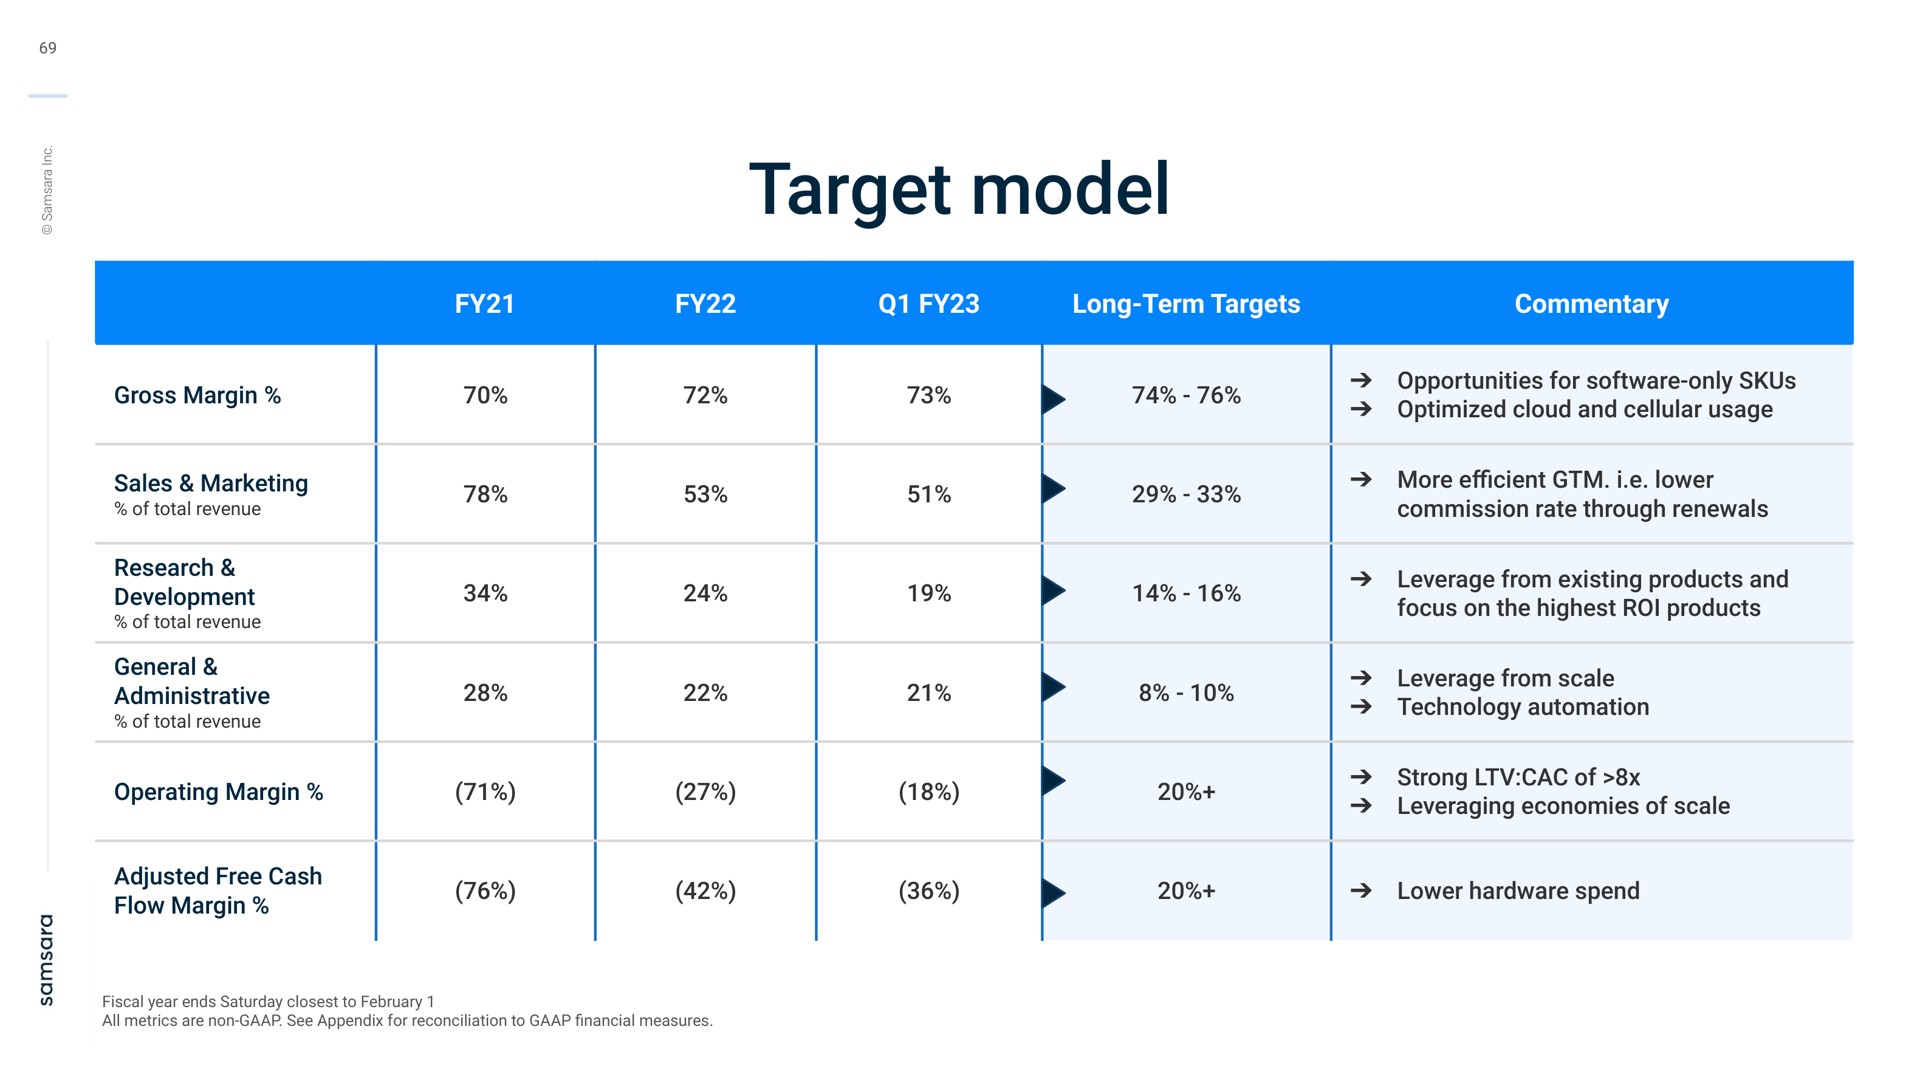 target model long term targets commentary gross margin sales marketing of total revenue research development of total revenue general administrative of total revenue operating margin opportunities for only optimized cloud and cellular usage more i lower commission rate through renewals leverage from existing products and focus on the highest roi products leverage from scale technology strong of leveraging economies of scale adjusted free cash flow margin lower hardware spend | Samsara